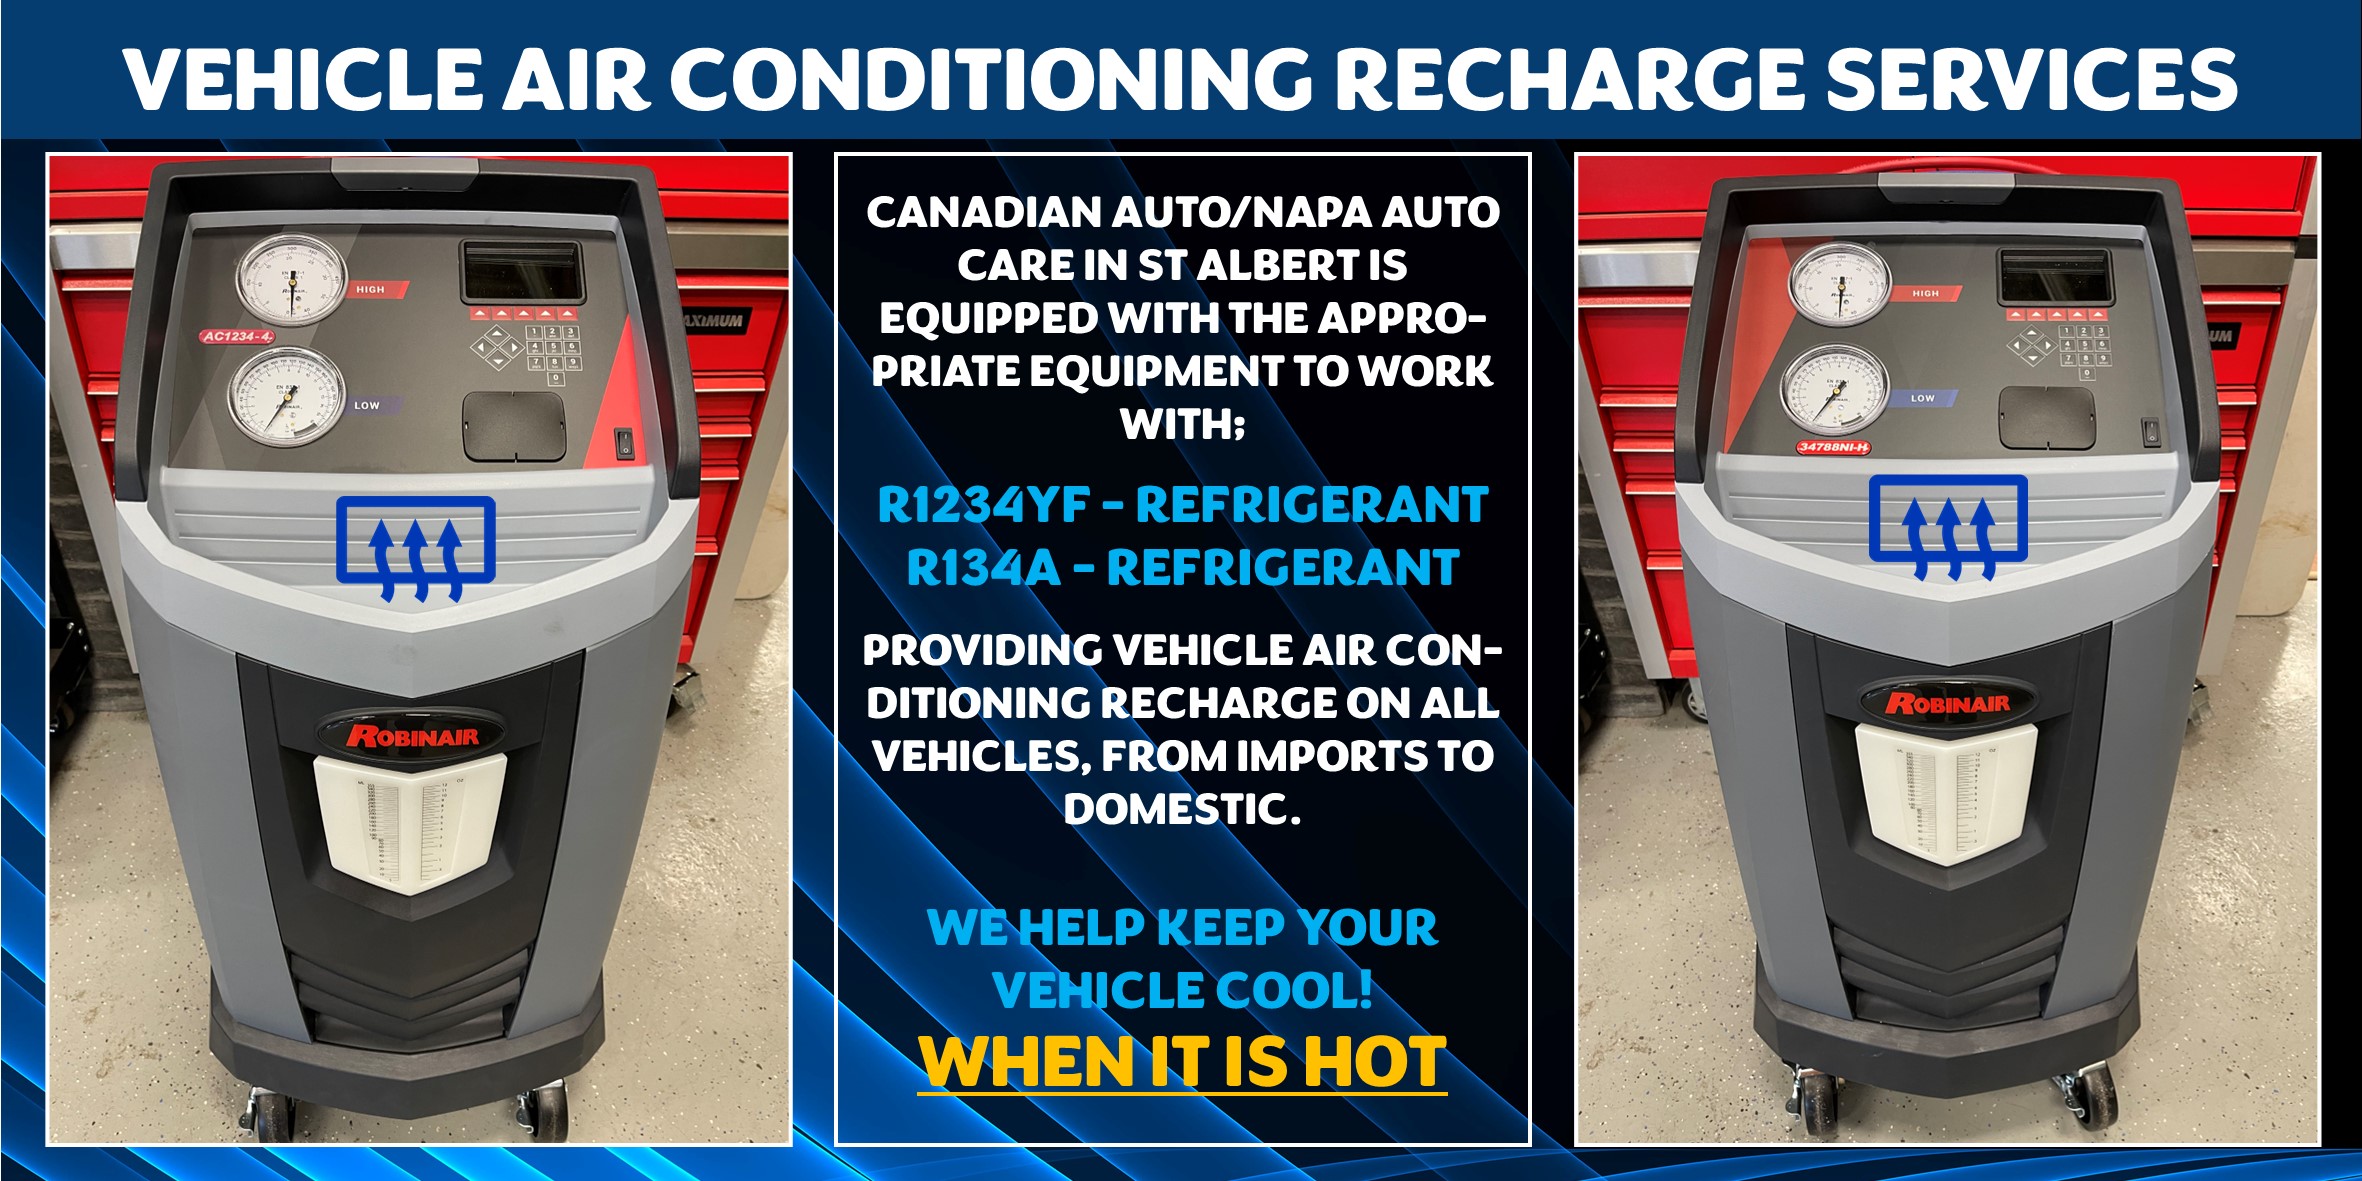 Get your Vehicle Air Conditioning Recharged